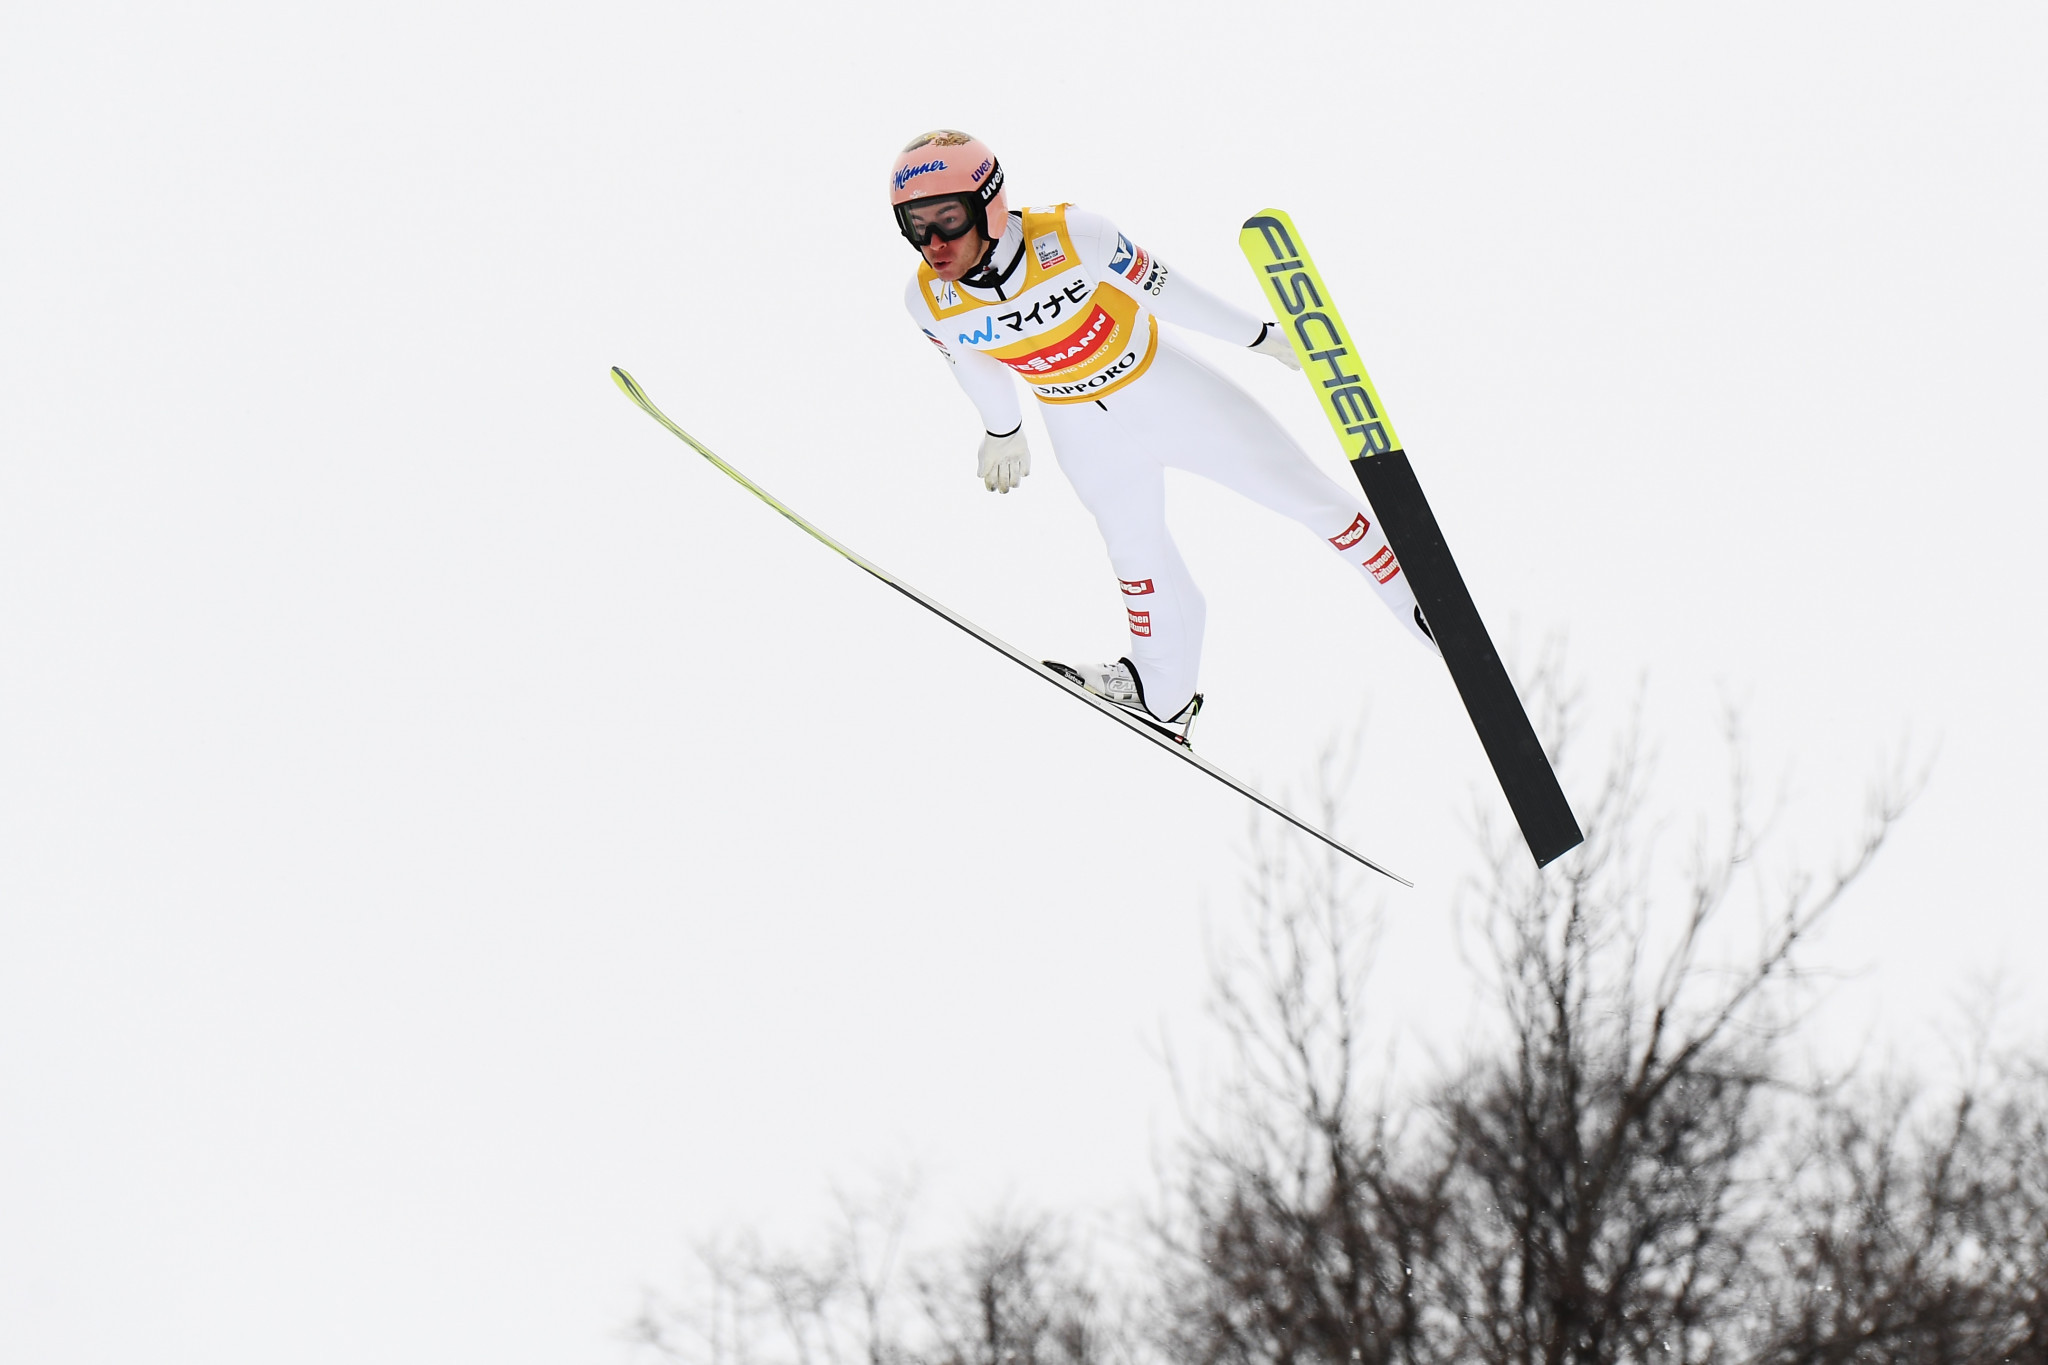 World Cup leader Stephan Kraft soars to victory in Sapporo ©Getty Images